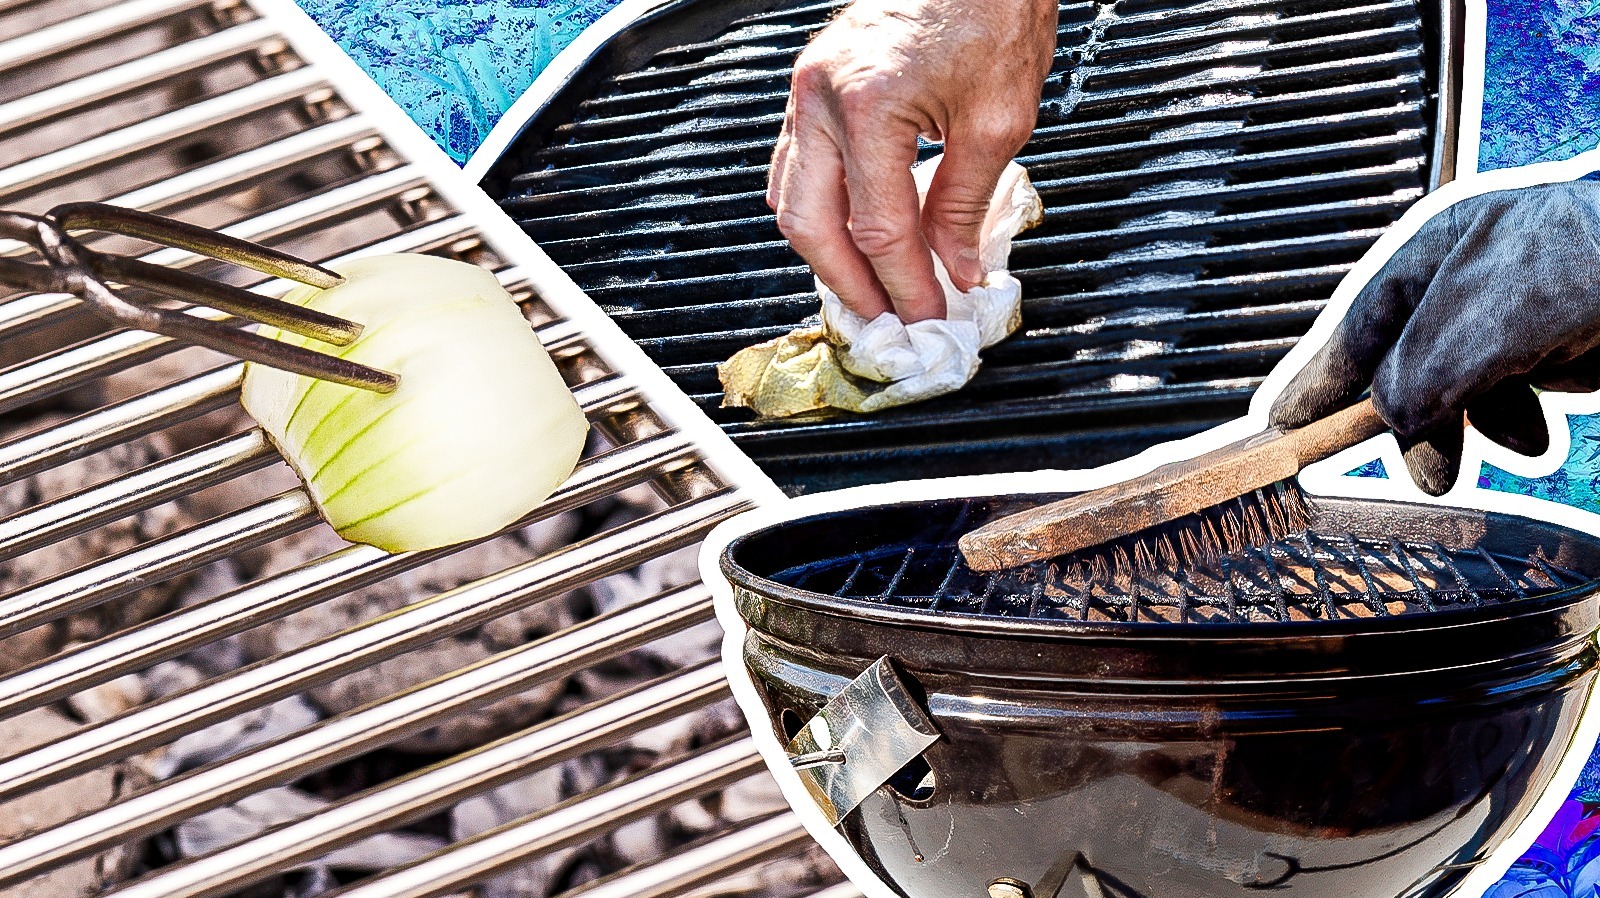 How to Clean a Grill Between Uses